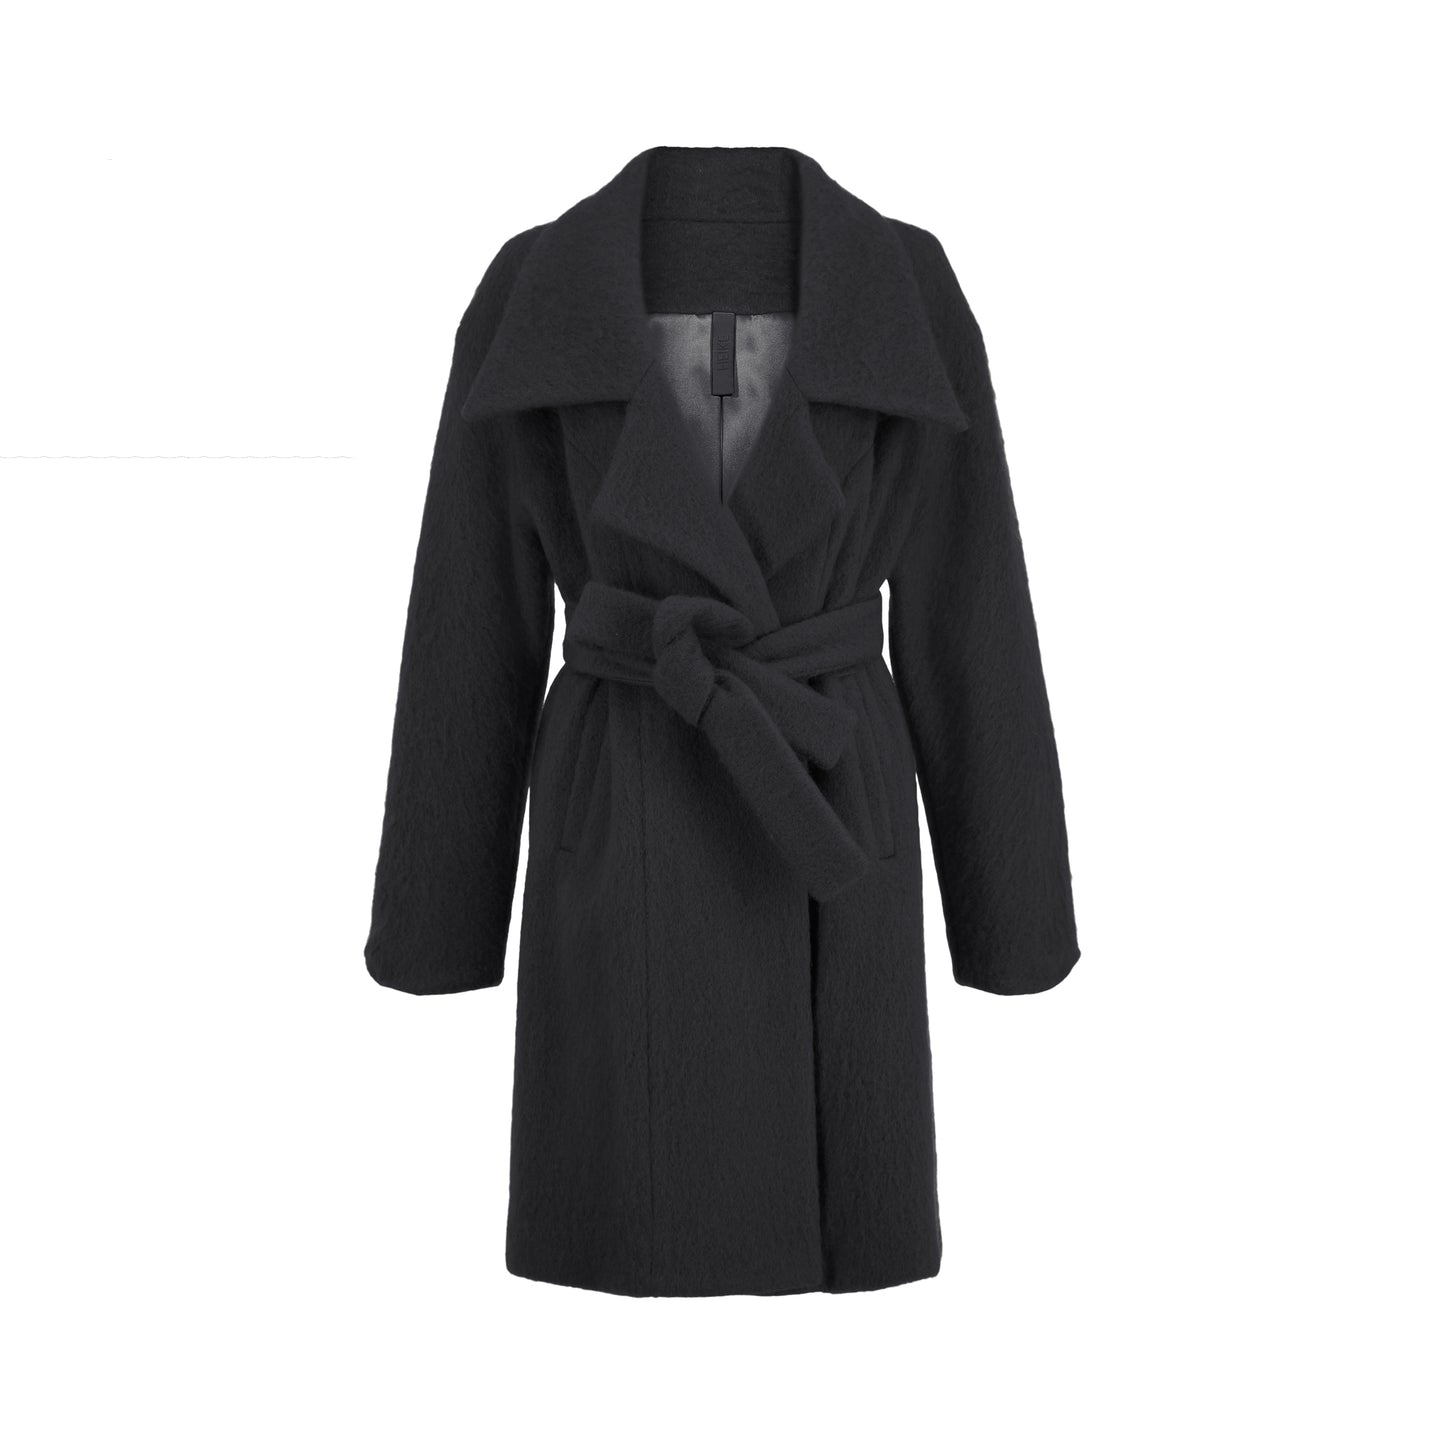 Mohair double breasted coat with wide collar cut and double self tie belt in black